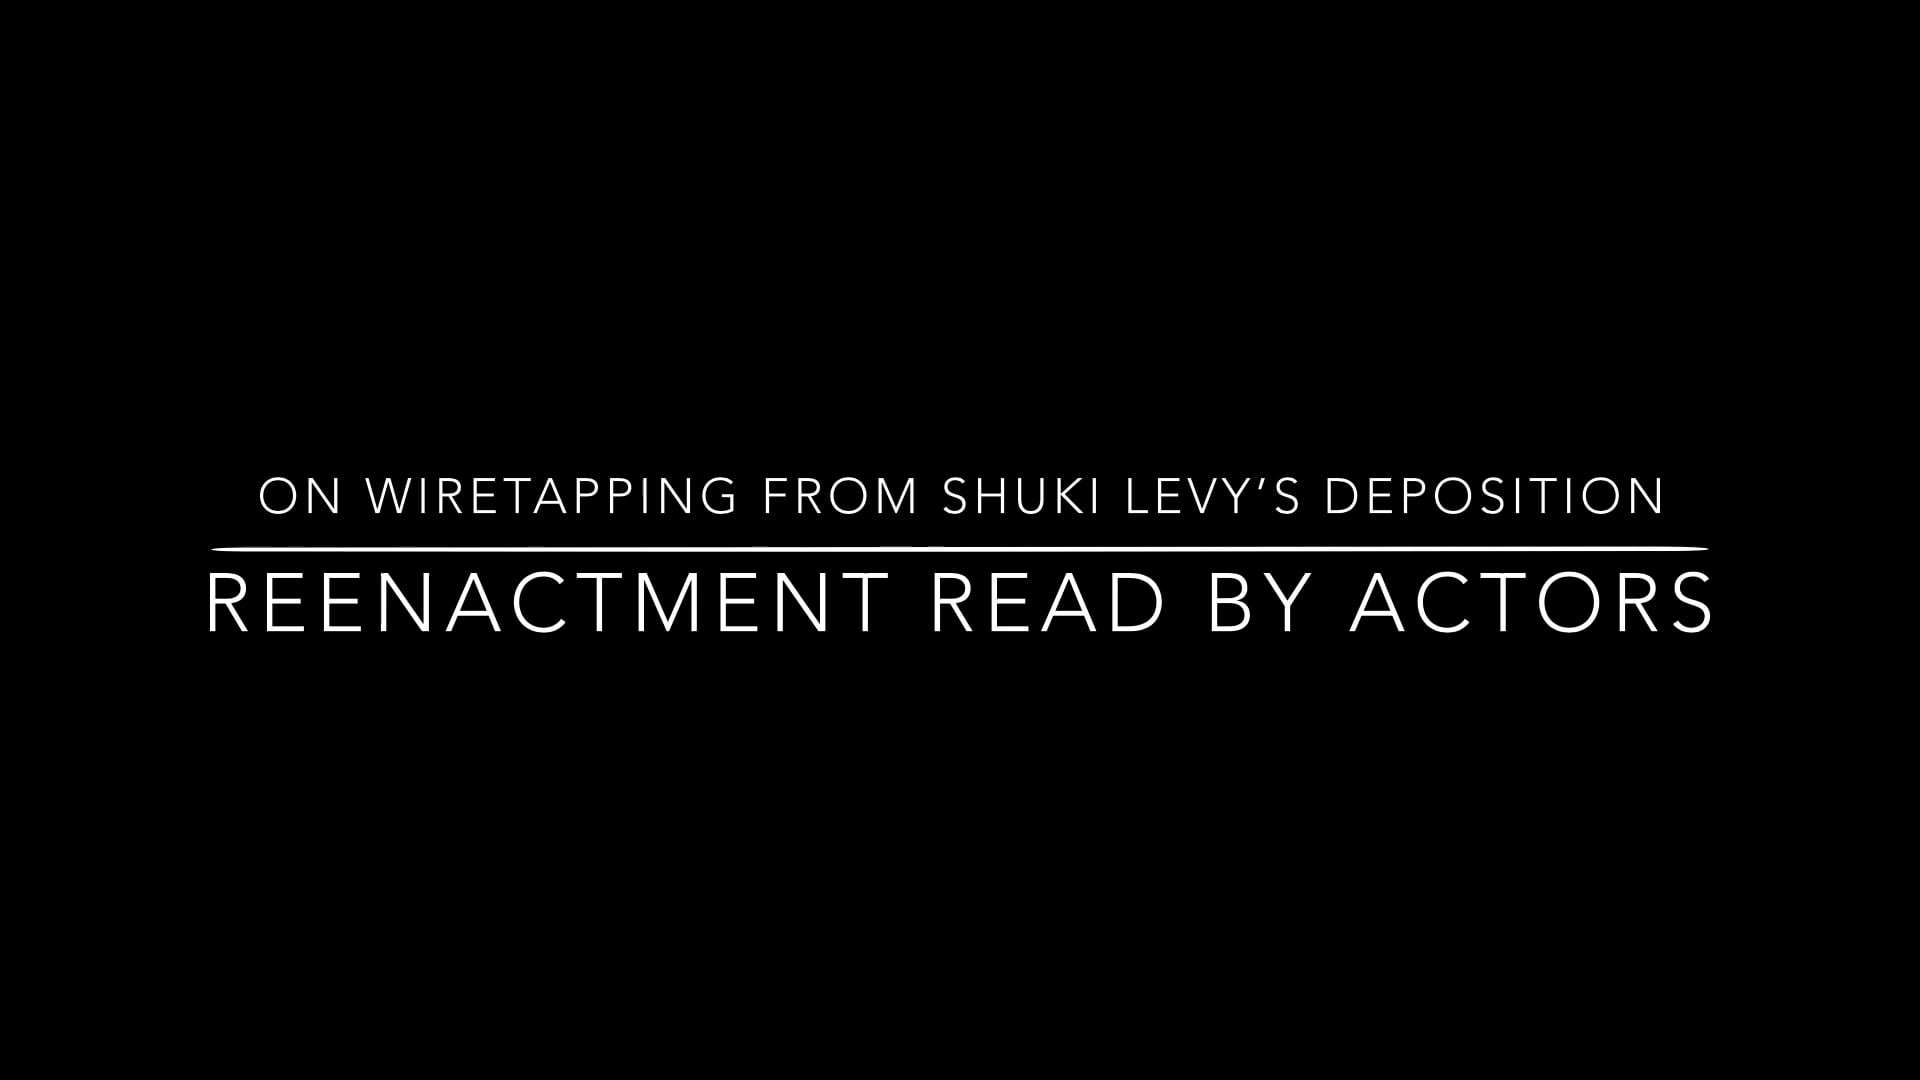 On Wiretapping from Shuki Levy’s Deposition